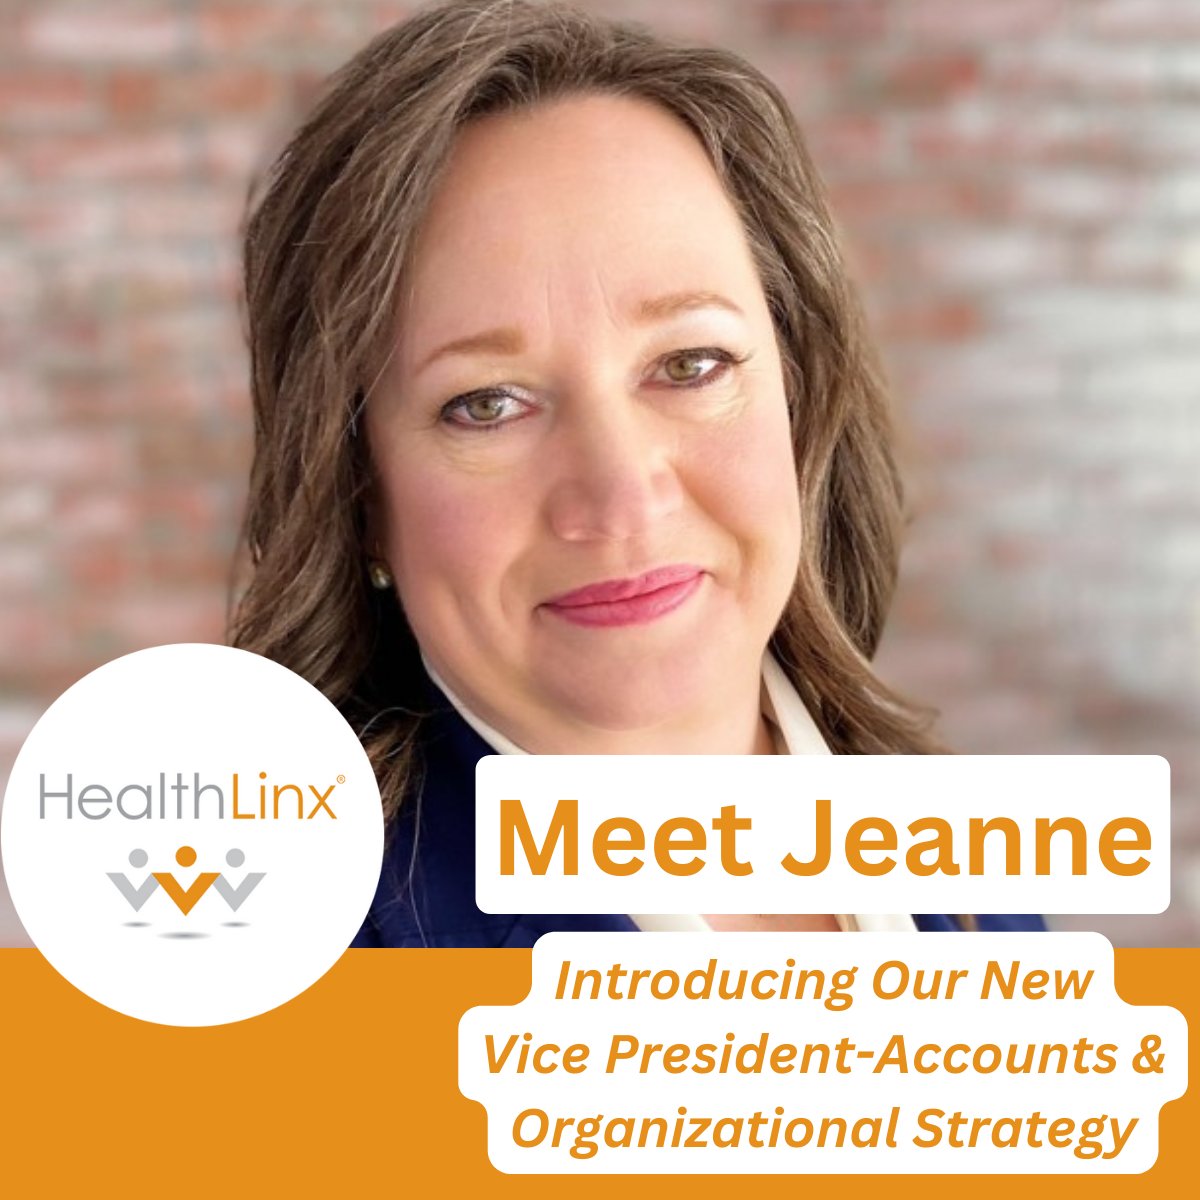 HealthLinx is happy to introduce Jeanne Schuppe as our Newest Vice President-Accounts & Organizational Strategy! We are so excited to work with Jeanne as a part of our team & to continue to help make facilities great places to work. 

#Welcome #TransformingHealthcareTogether